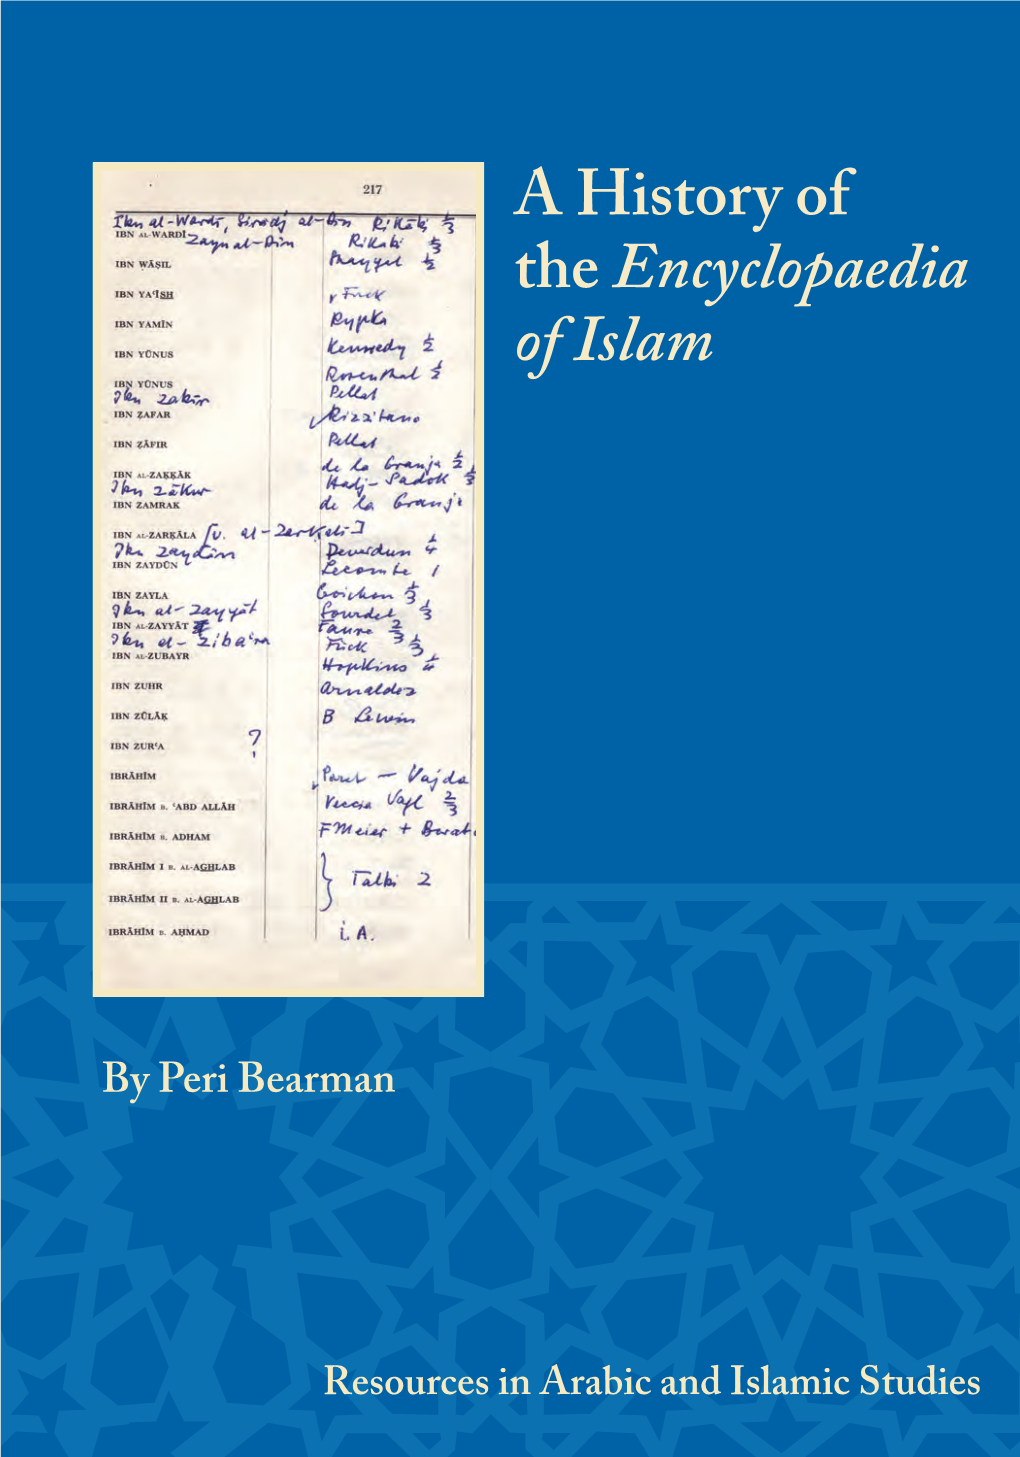 A History of the Encyclopaedia of Islam Resources in Arabic and Islamic Studies